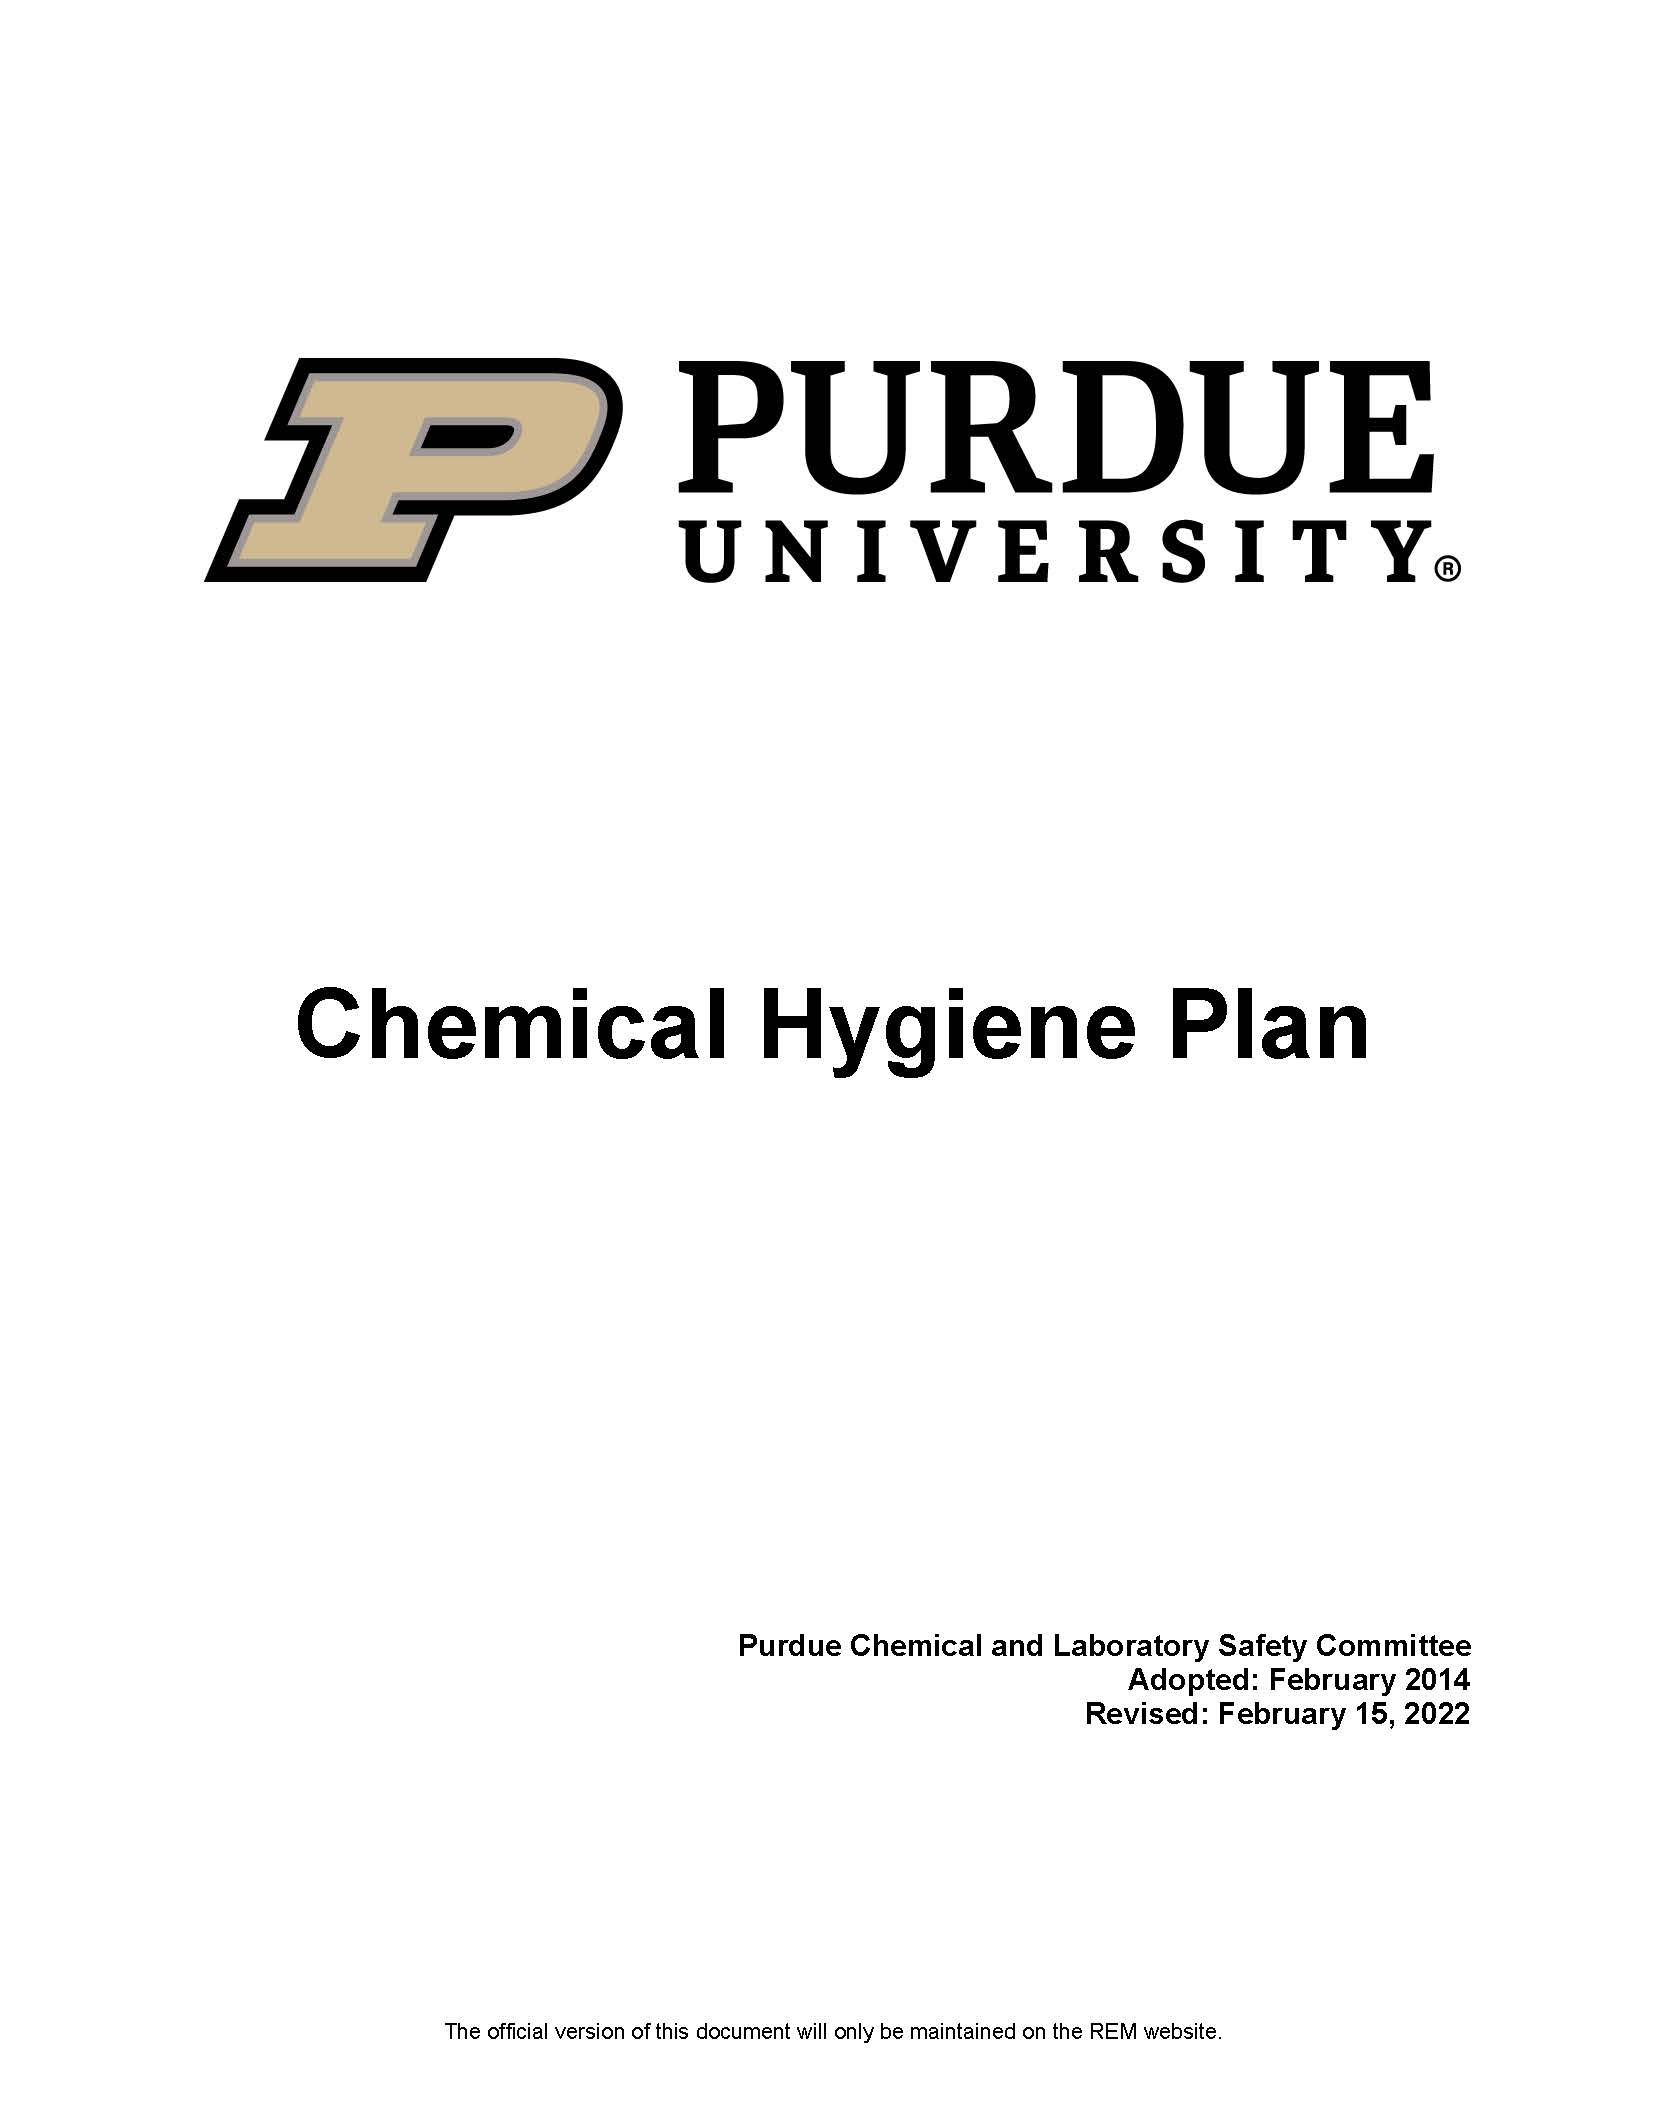 clickable link to the chemical hygiene plan